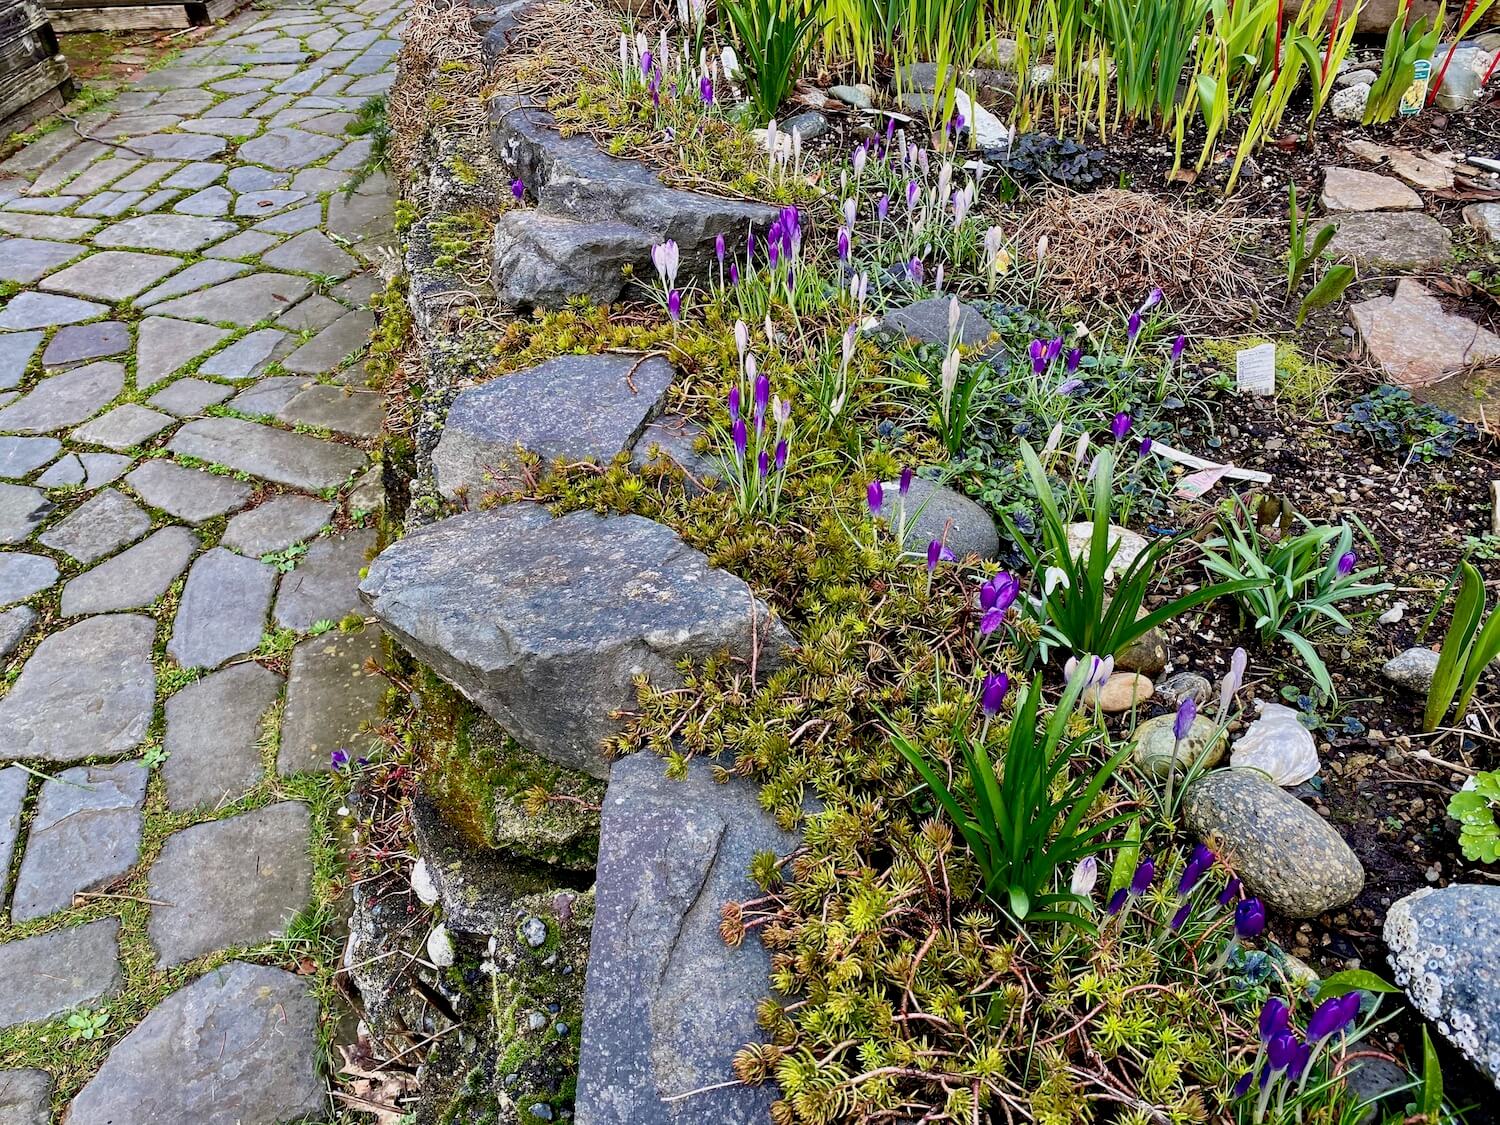 Crocus emerge along a raised rockery bed with green shoots of bulb flowers in Thomas Garden on Seattle's Capitol Hill.